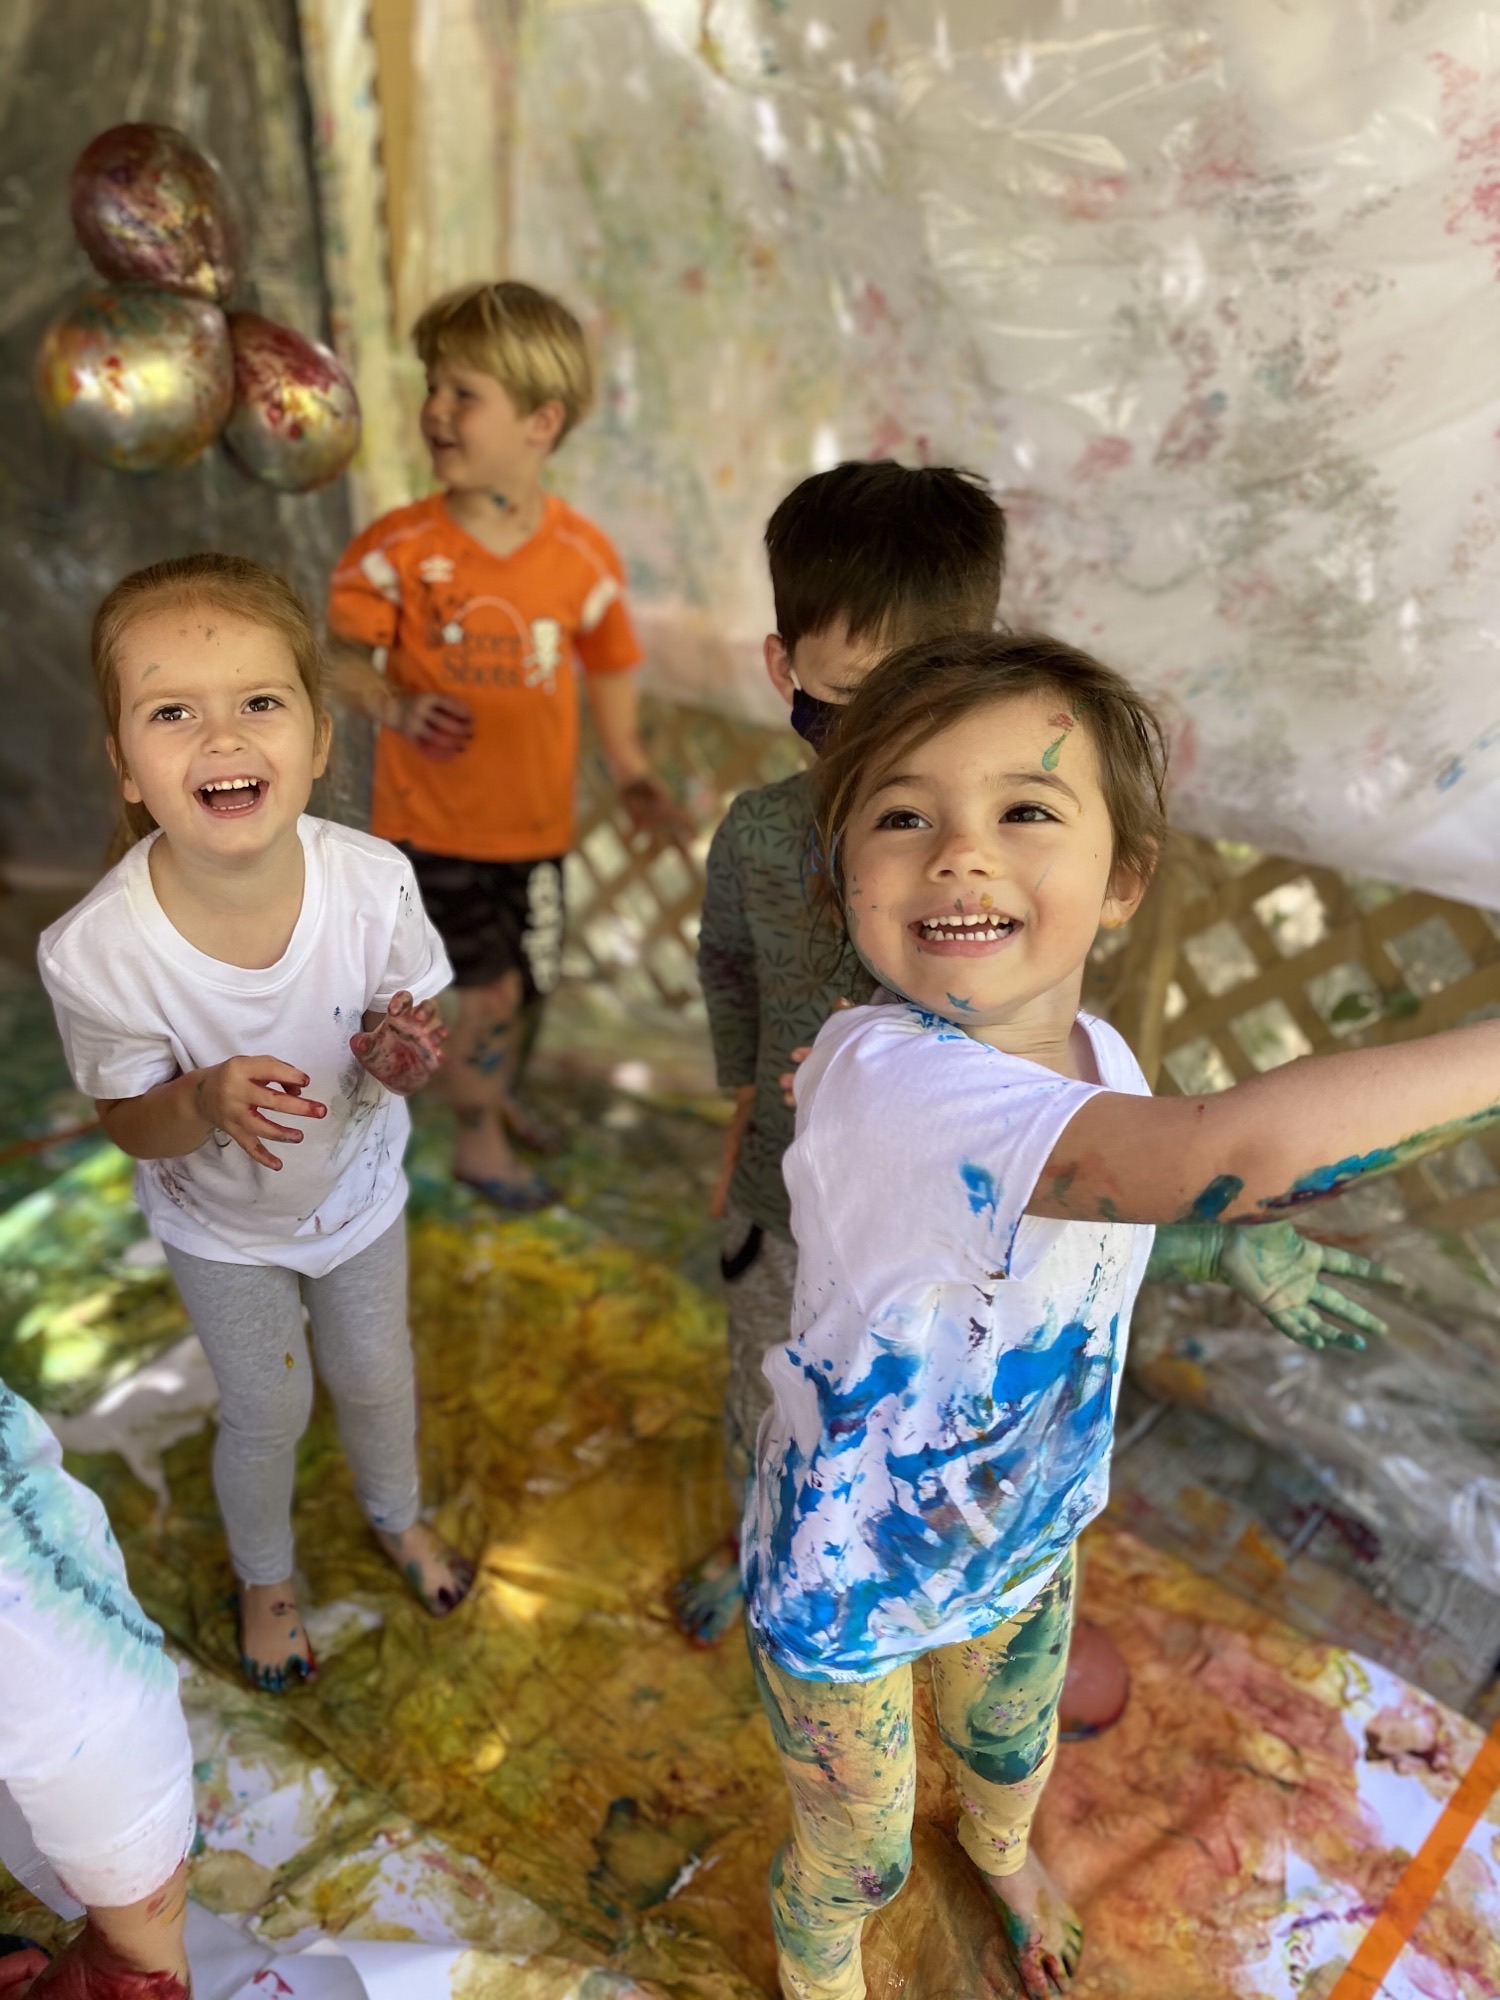 young kids with paint balloons at preschool